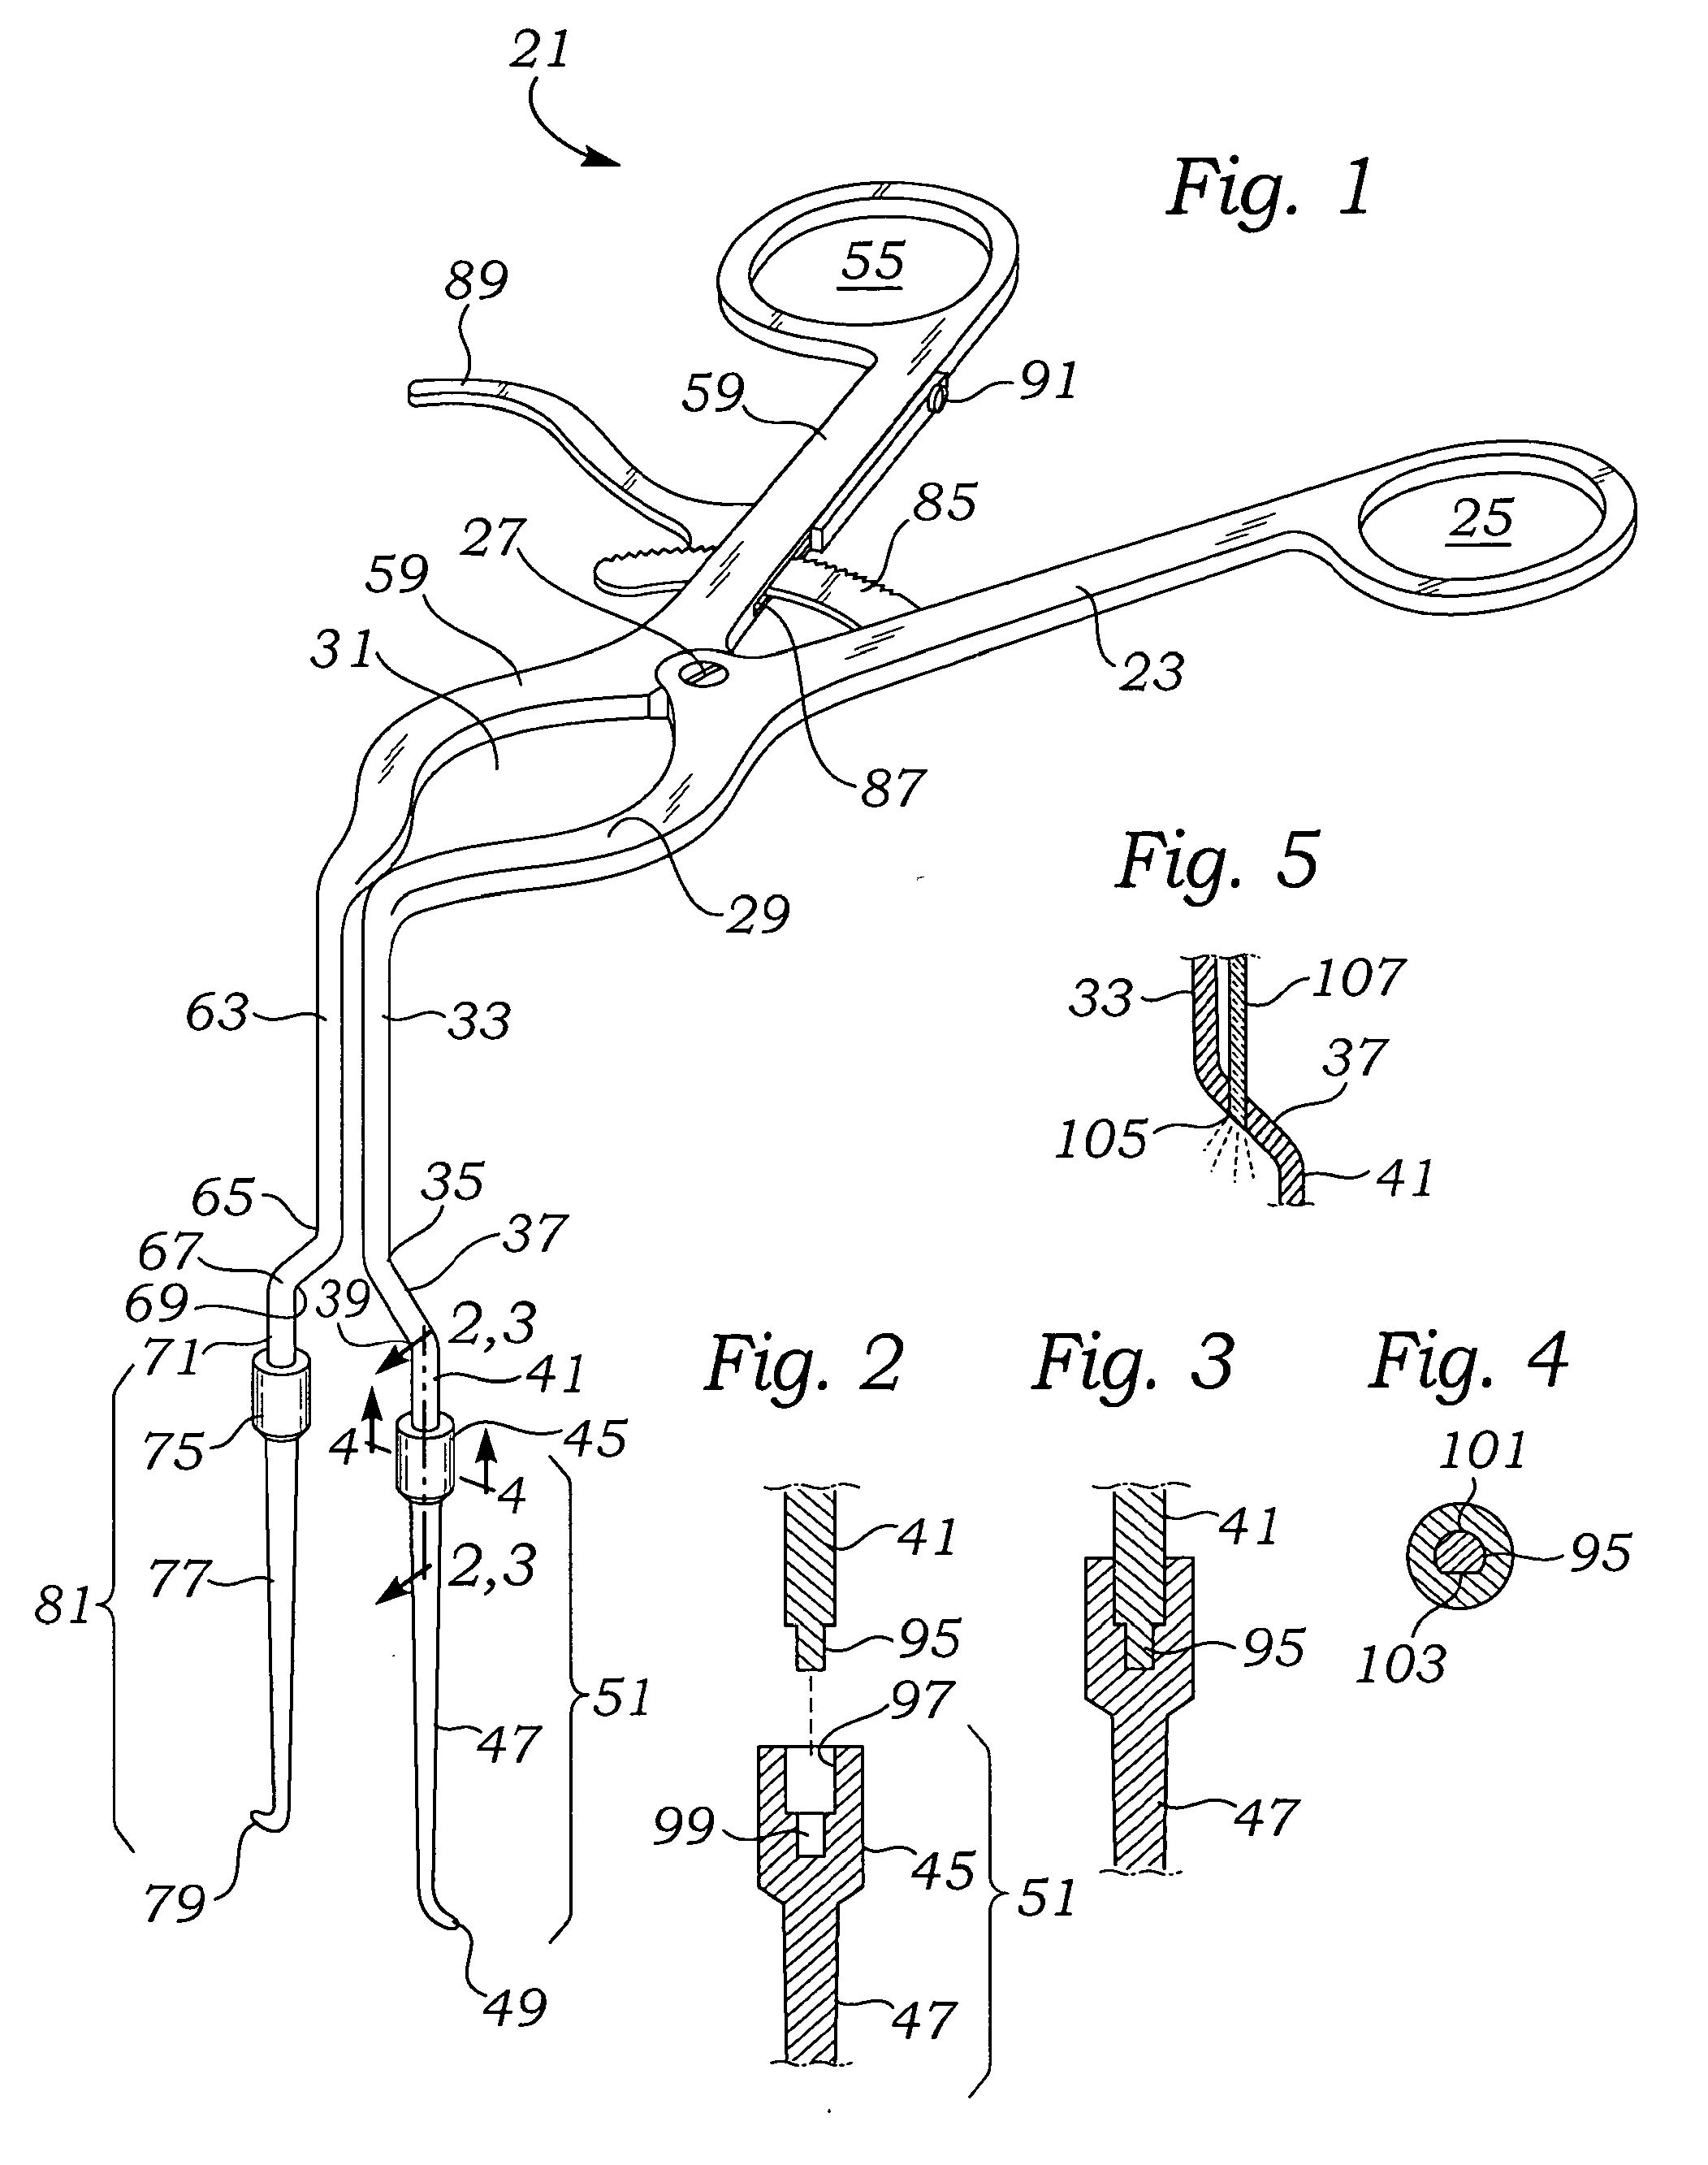 Minimal incision maximal access spine surgery instruments and method